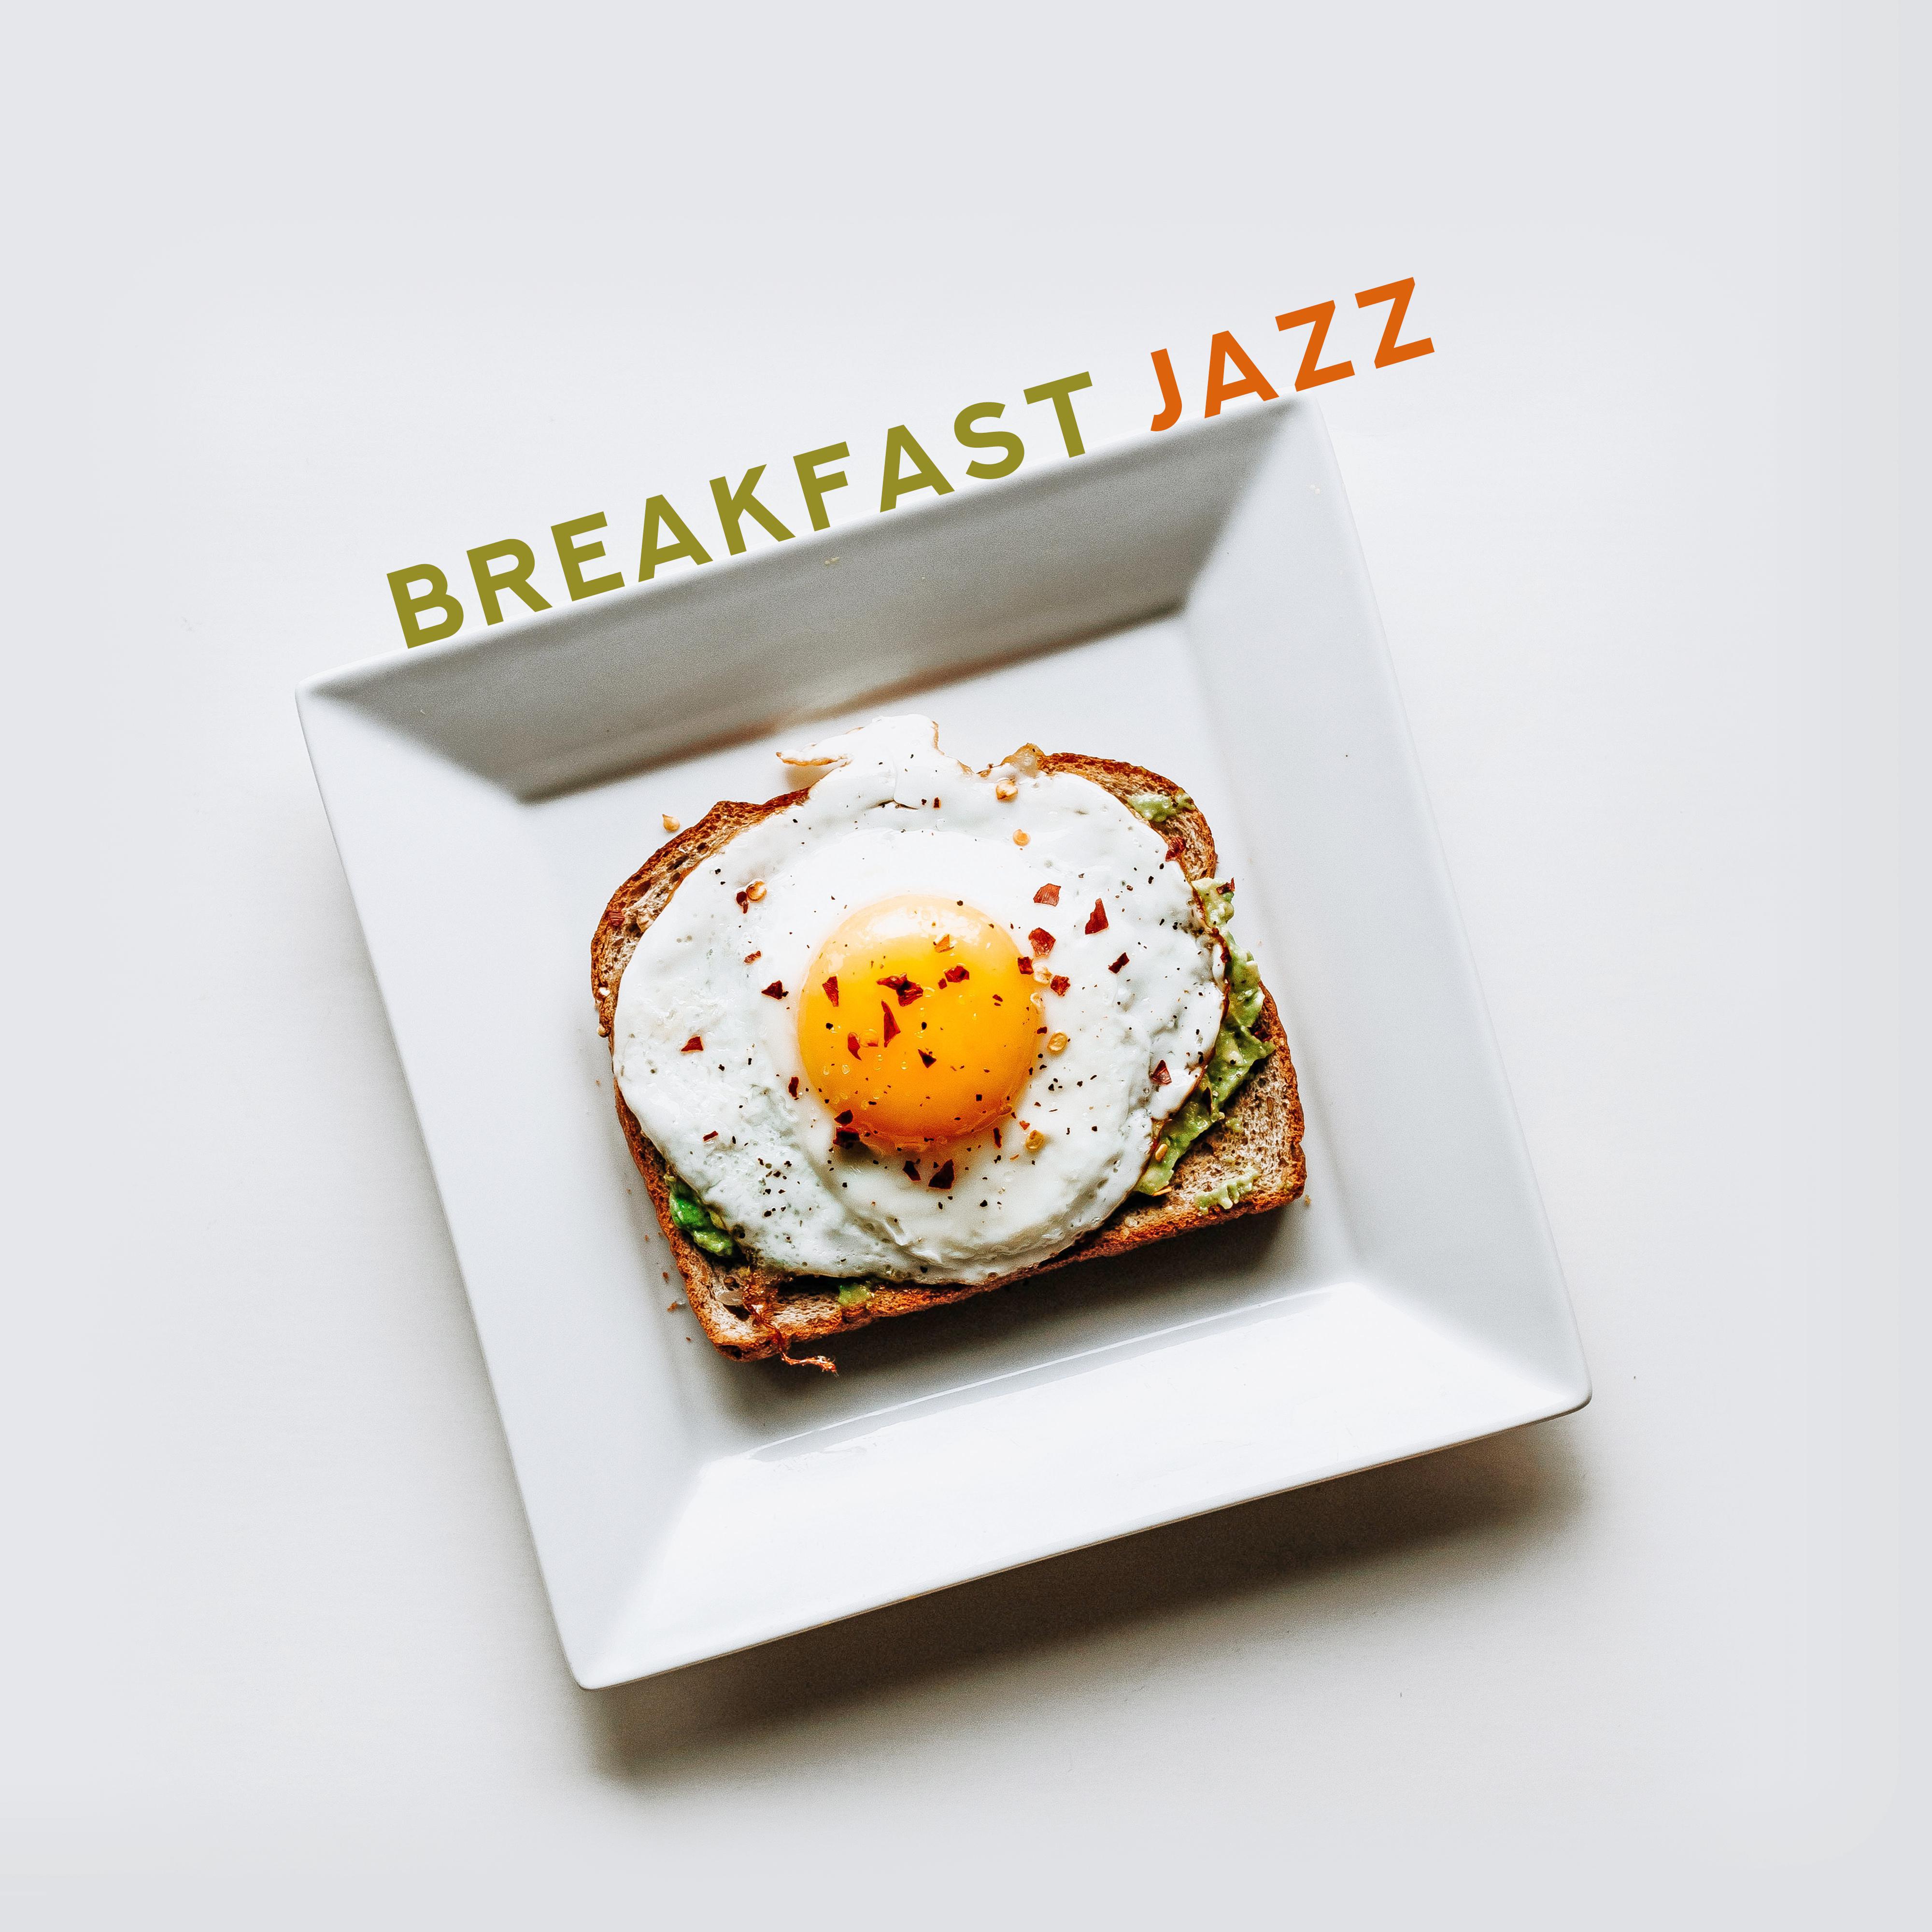 Breakfast Jazz: Relaxing Music, Smooth Jazz for Coffee, Jazz Music Ambient, Pure Relaxation, Vintage Cafe, Coffee Time Jazz